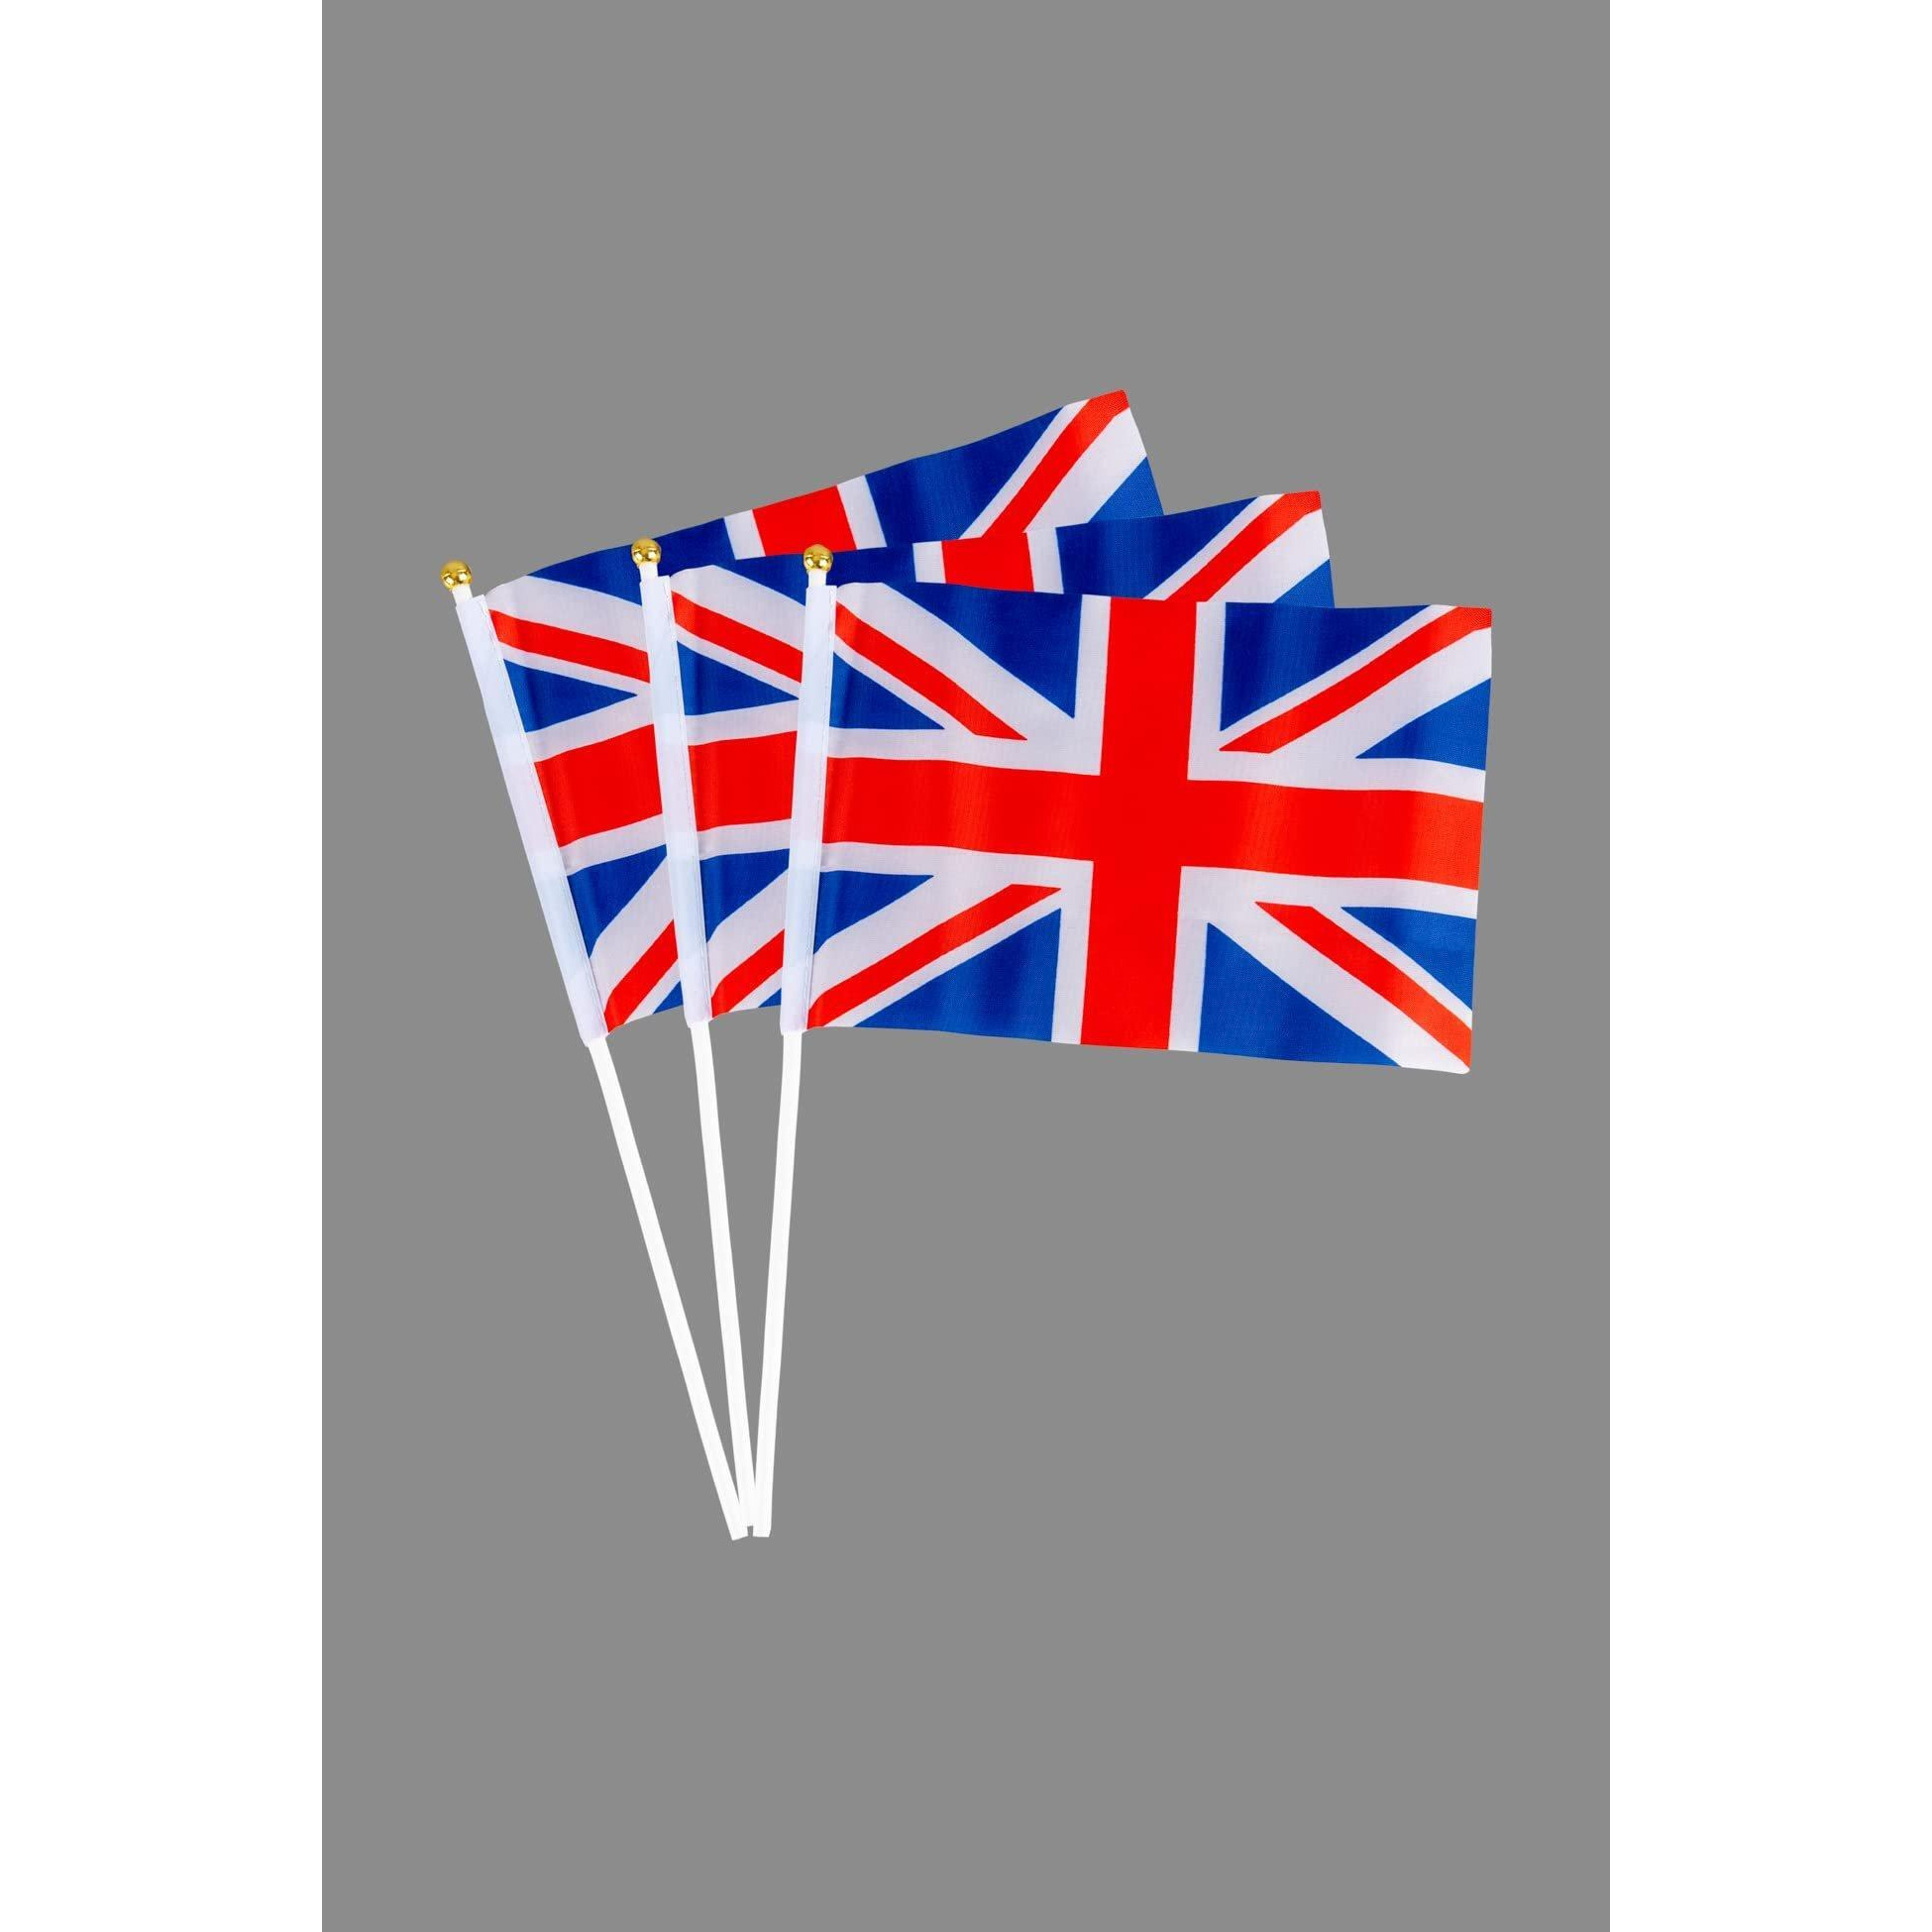 Union Jack Hand Flags pack of 5 King Charles Coronation Waving Flag Royal Street Party Celebrations Sporting Events Pub BBQ Car - image 1